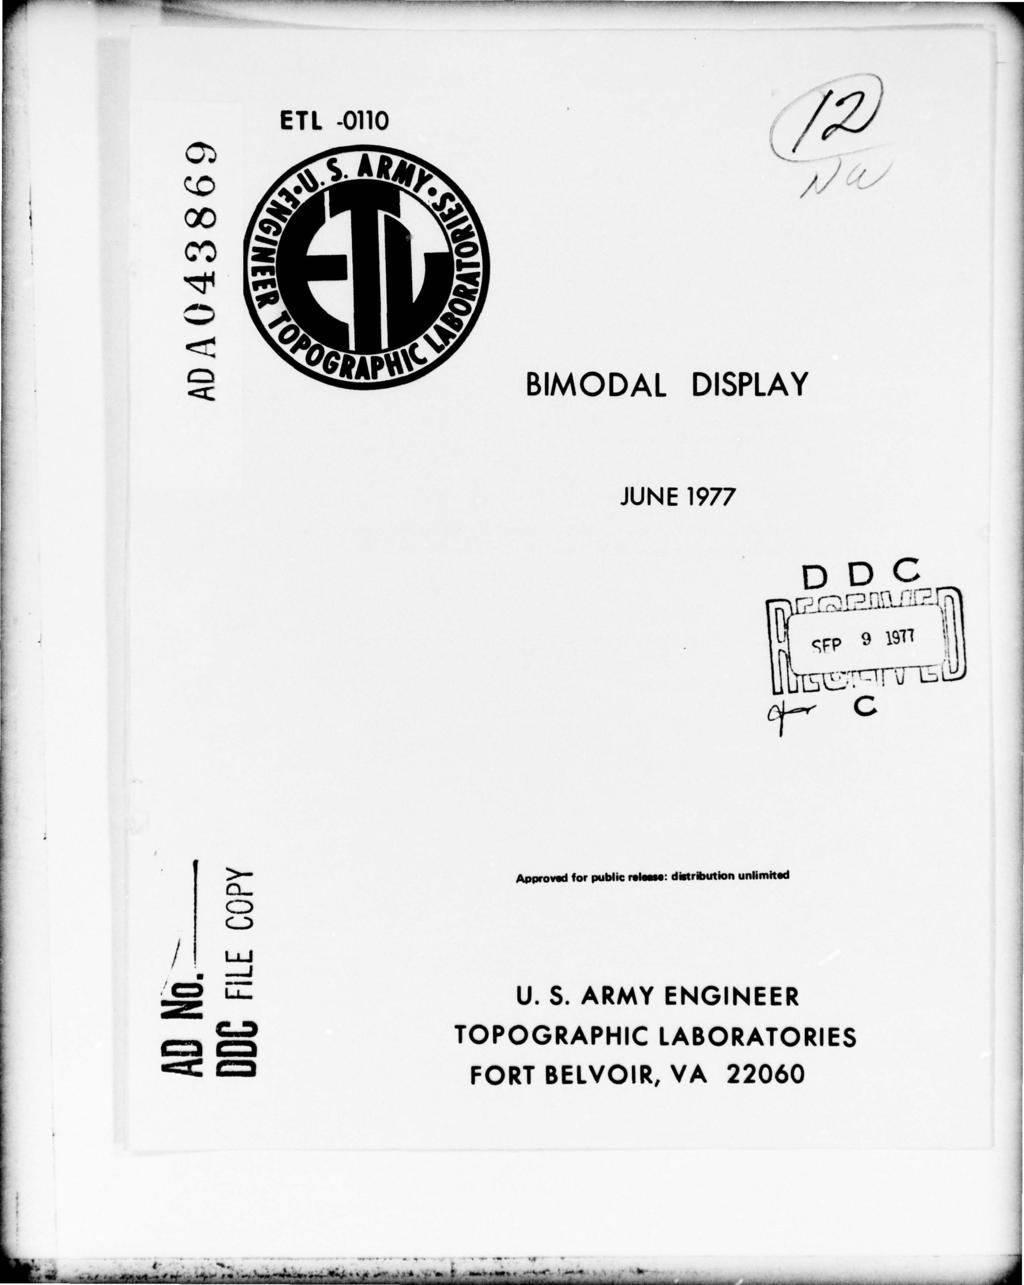 ETL ( j \ \ j JJ A BIMODAL DISPLAY JUNE 1977 DOG 9 1911 1r 1i c r C C) C) Approvud for public